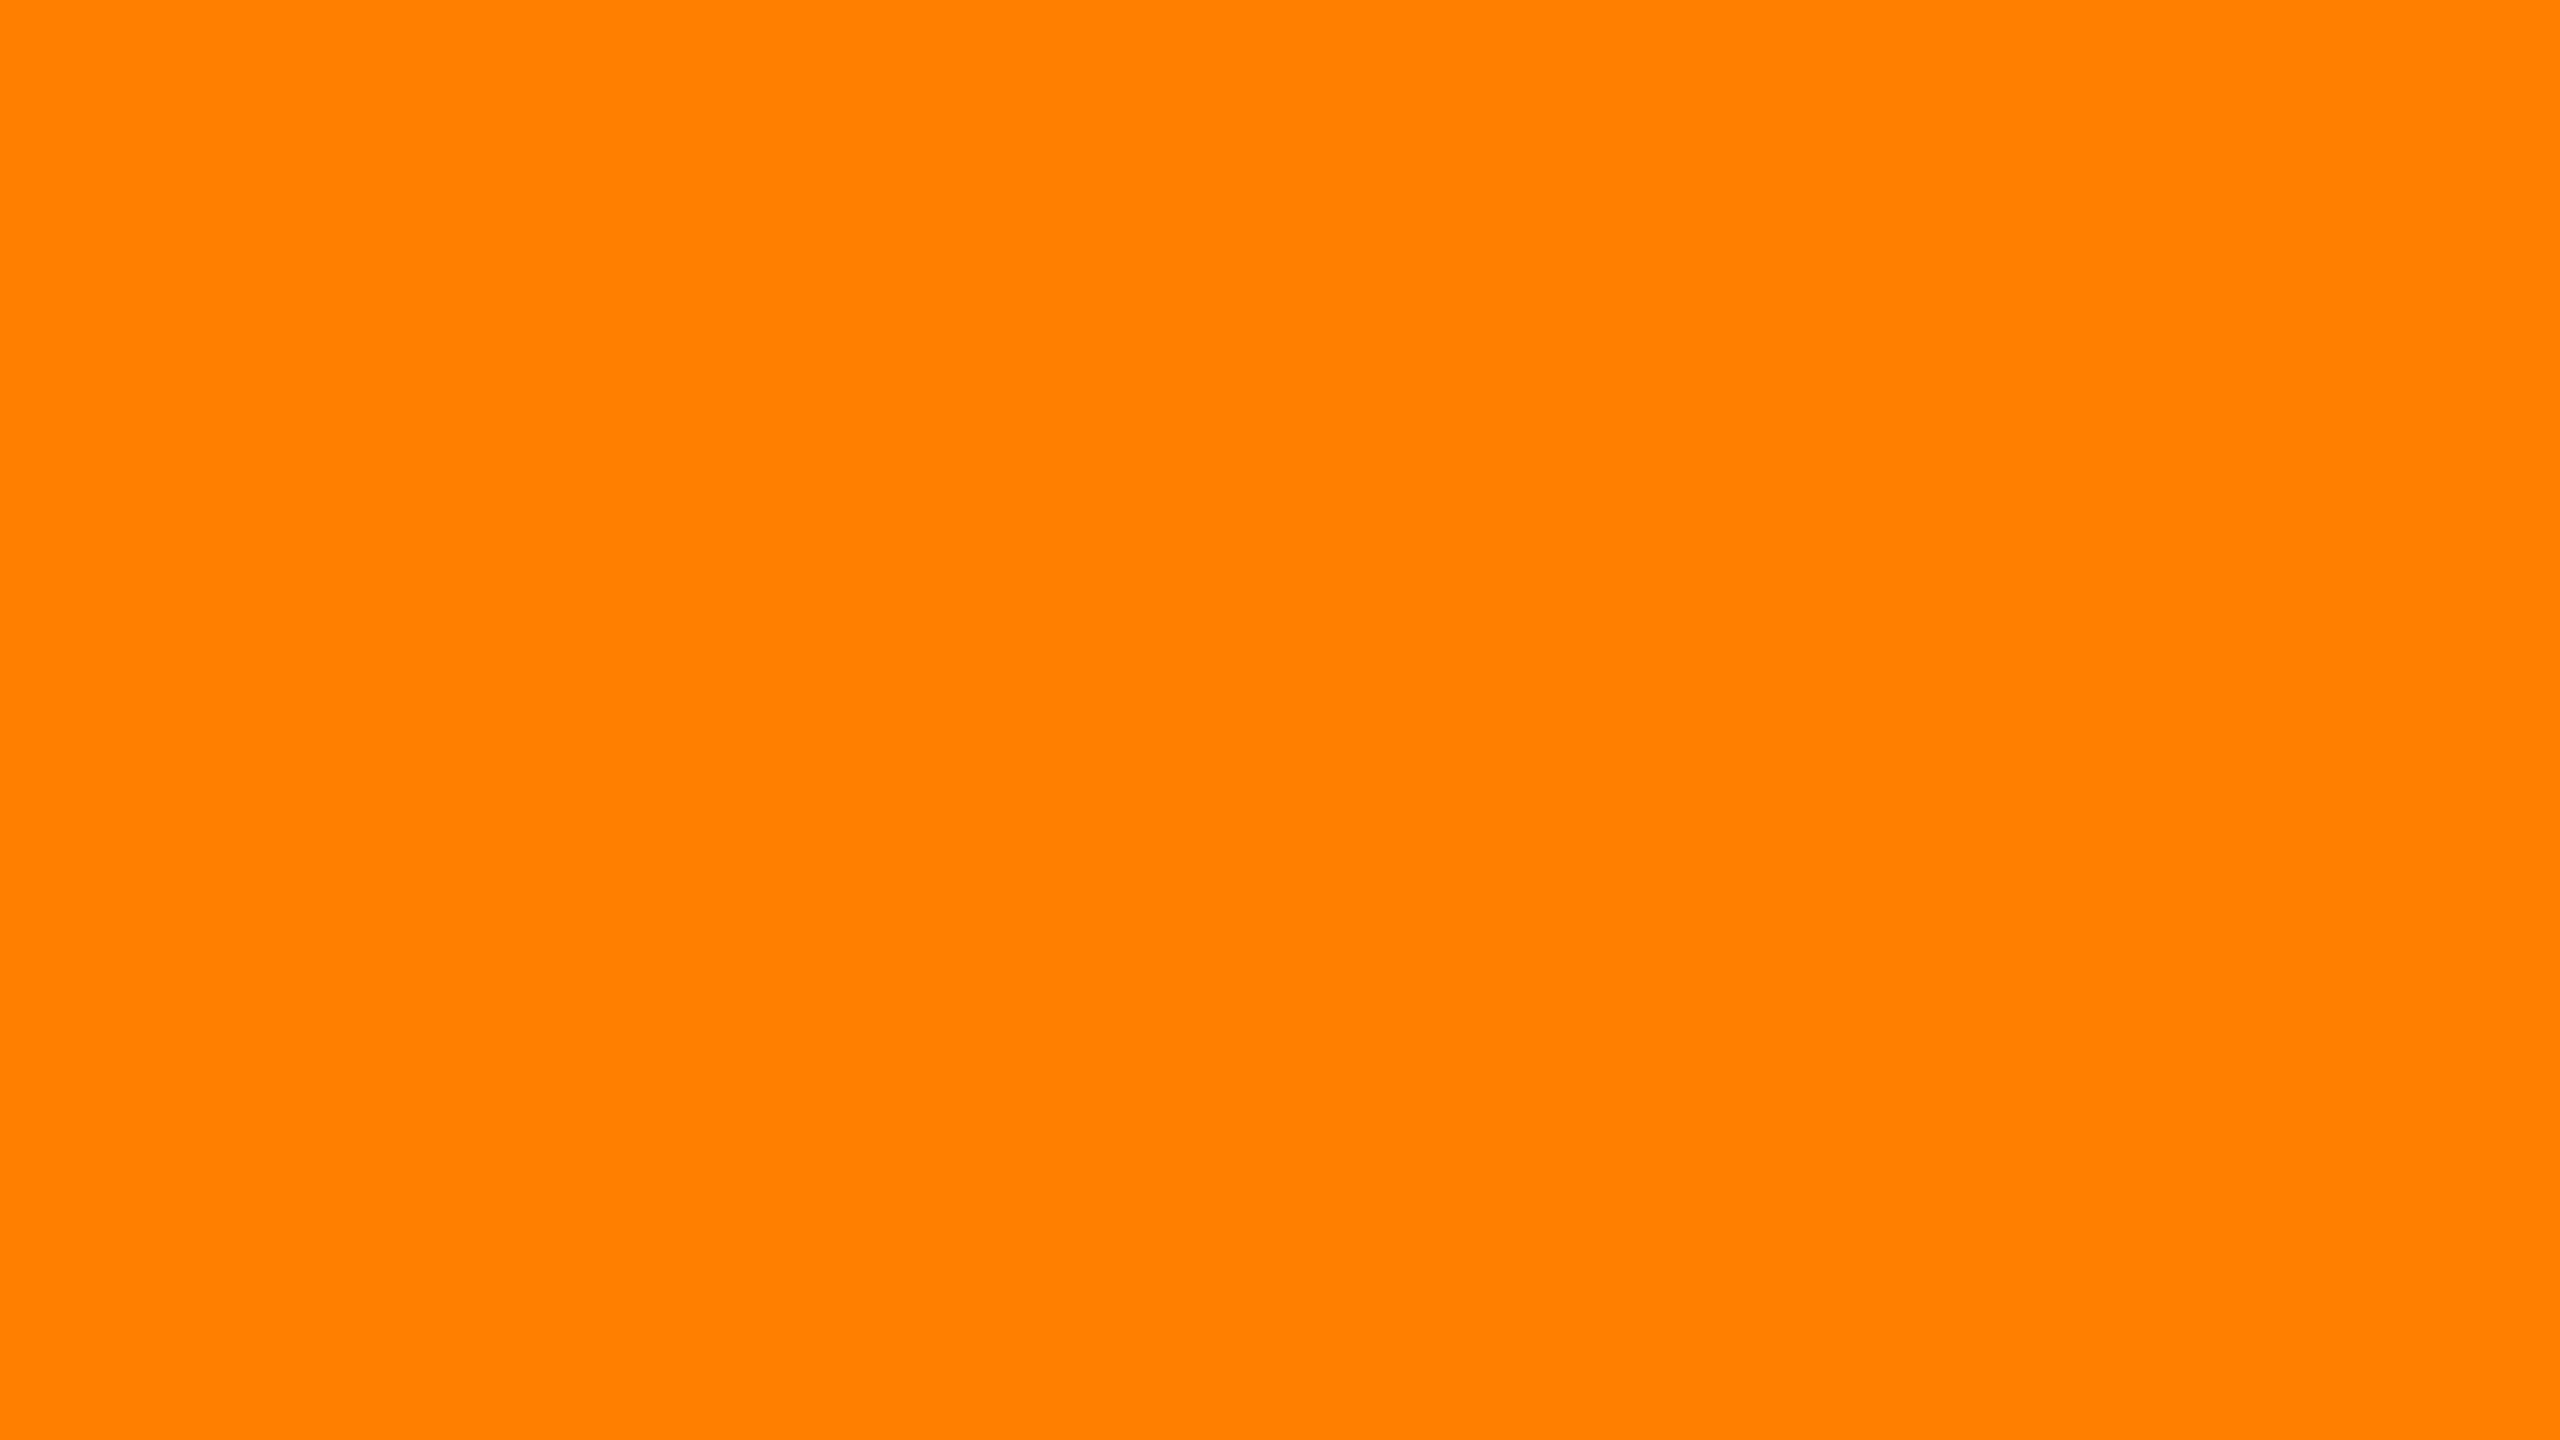 http://www.solidbackgrounds.com/images/2560x1440/2560x1440-orange-color-wheel-solid-color-background.jpg